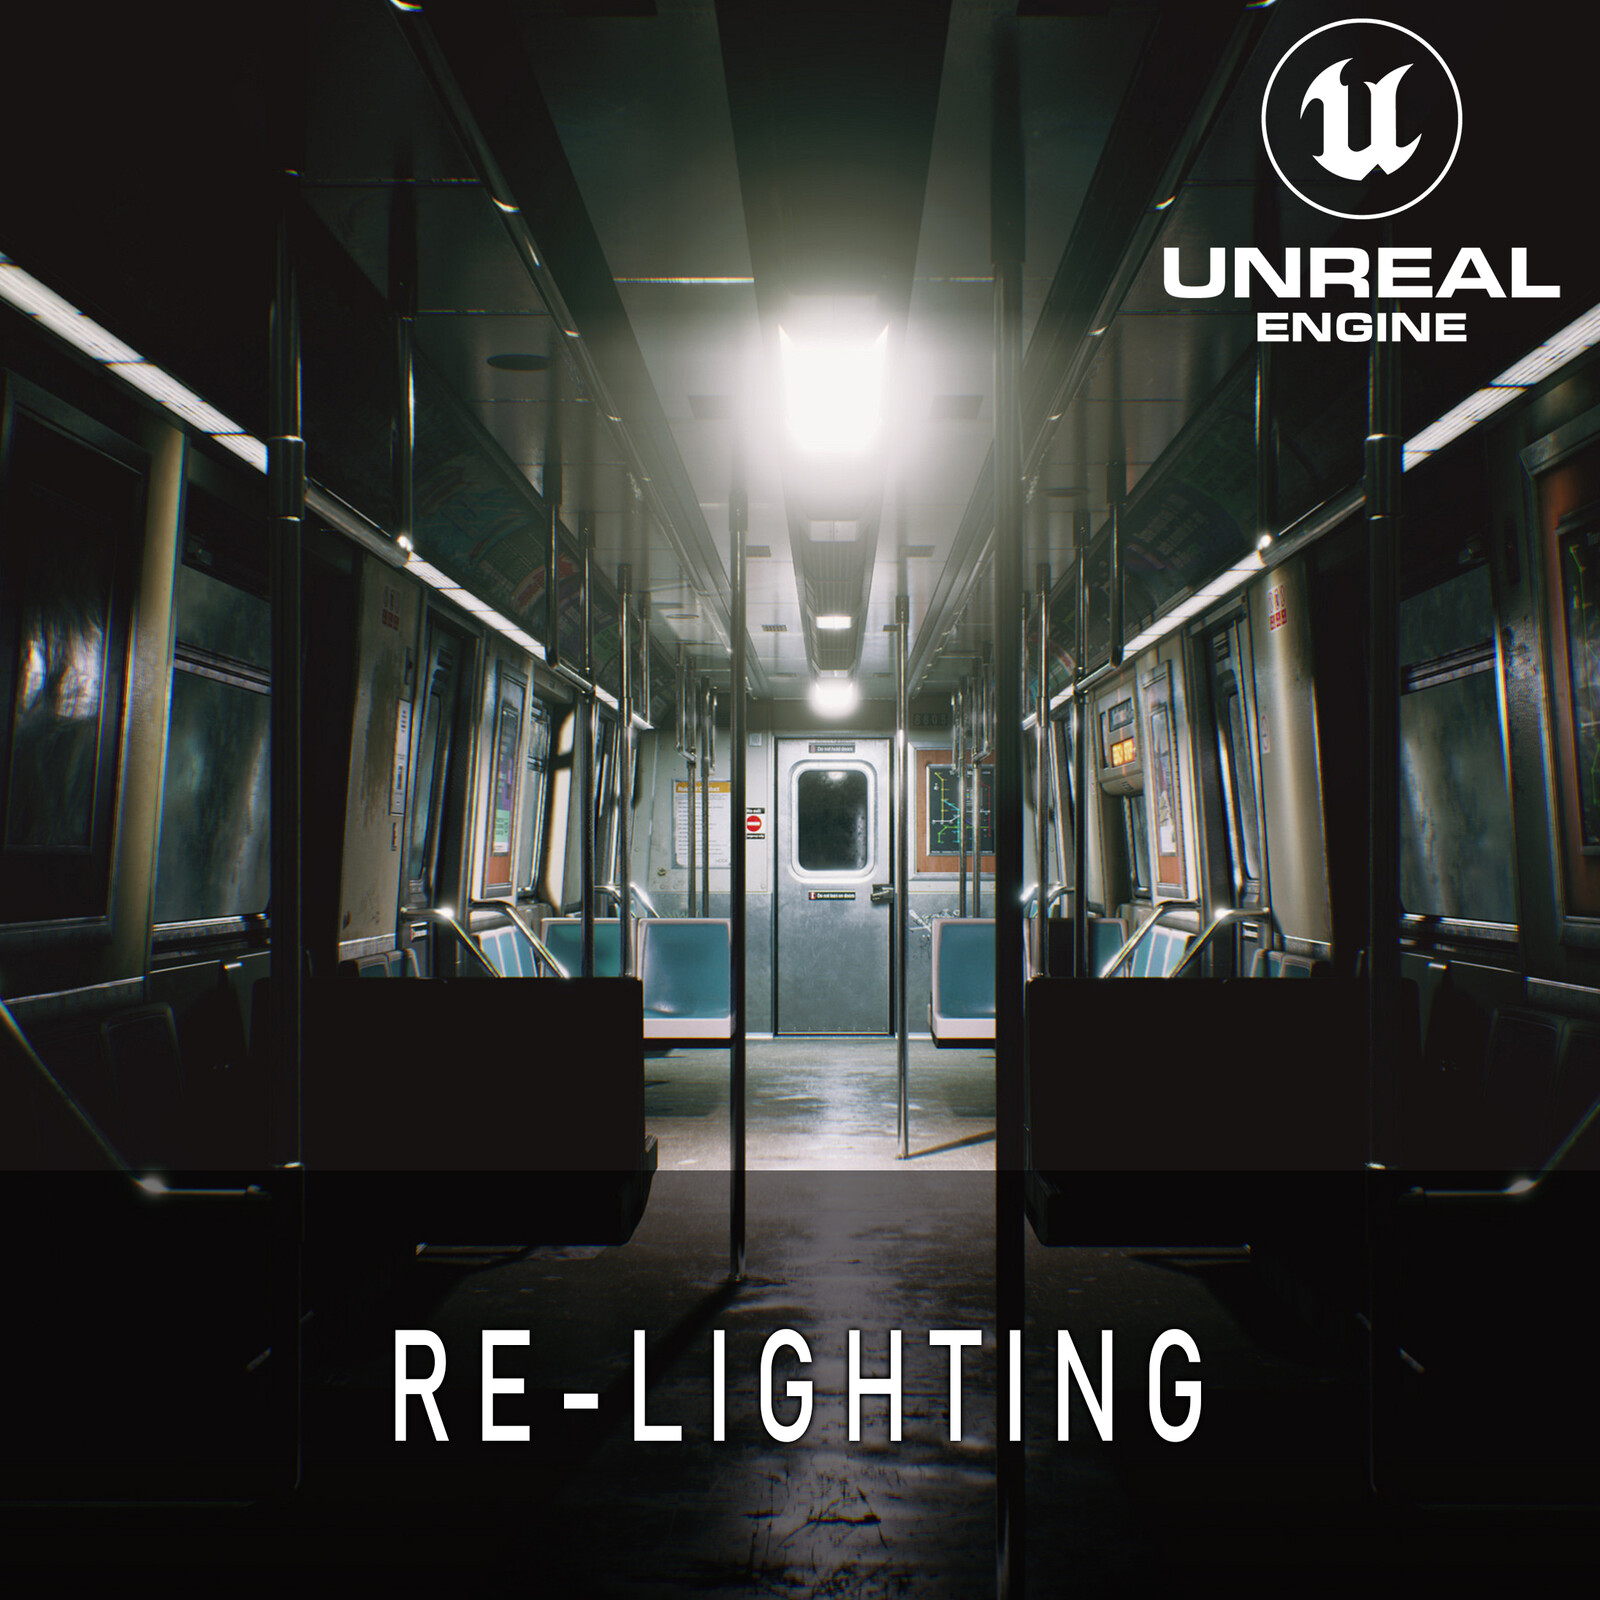 Train Carriage Relighting